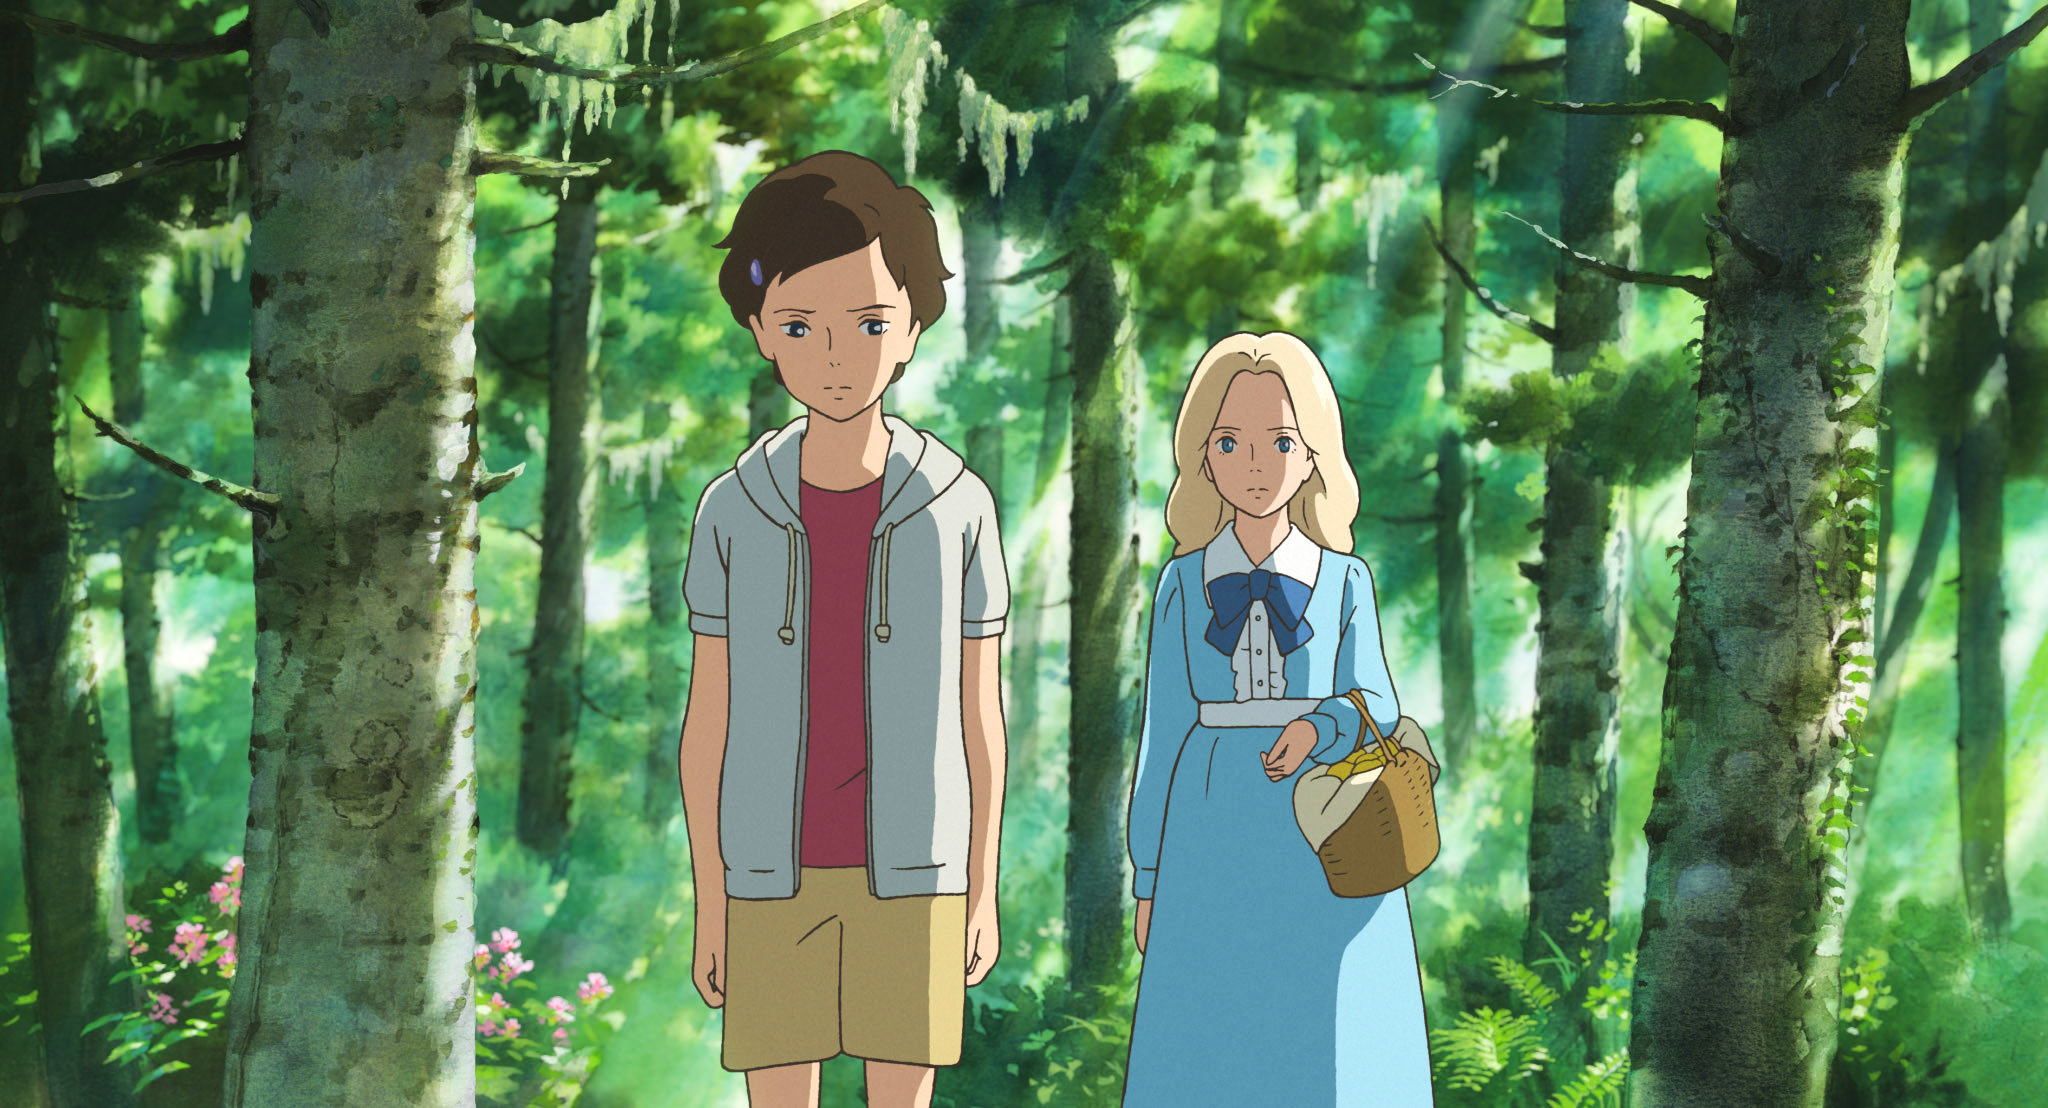 Anna and Marnie standing in the forest while Marnie holds a picnic basket